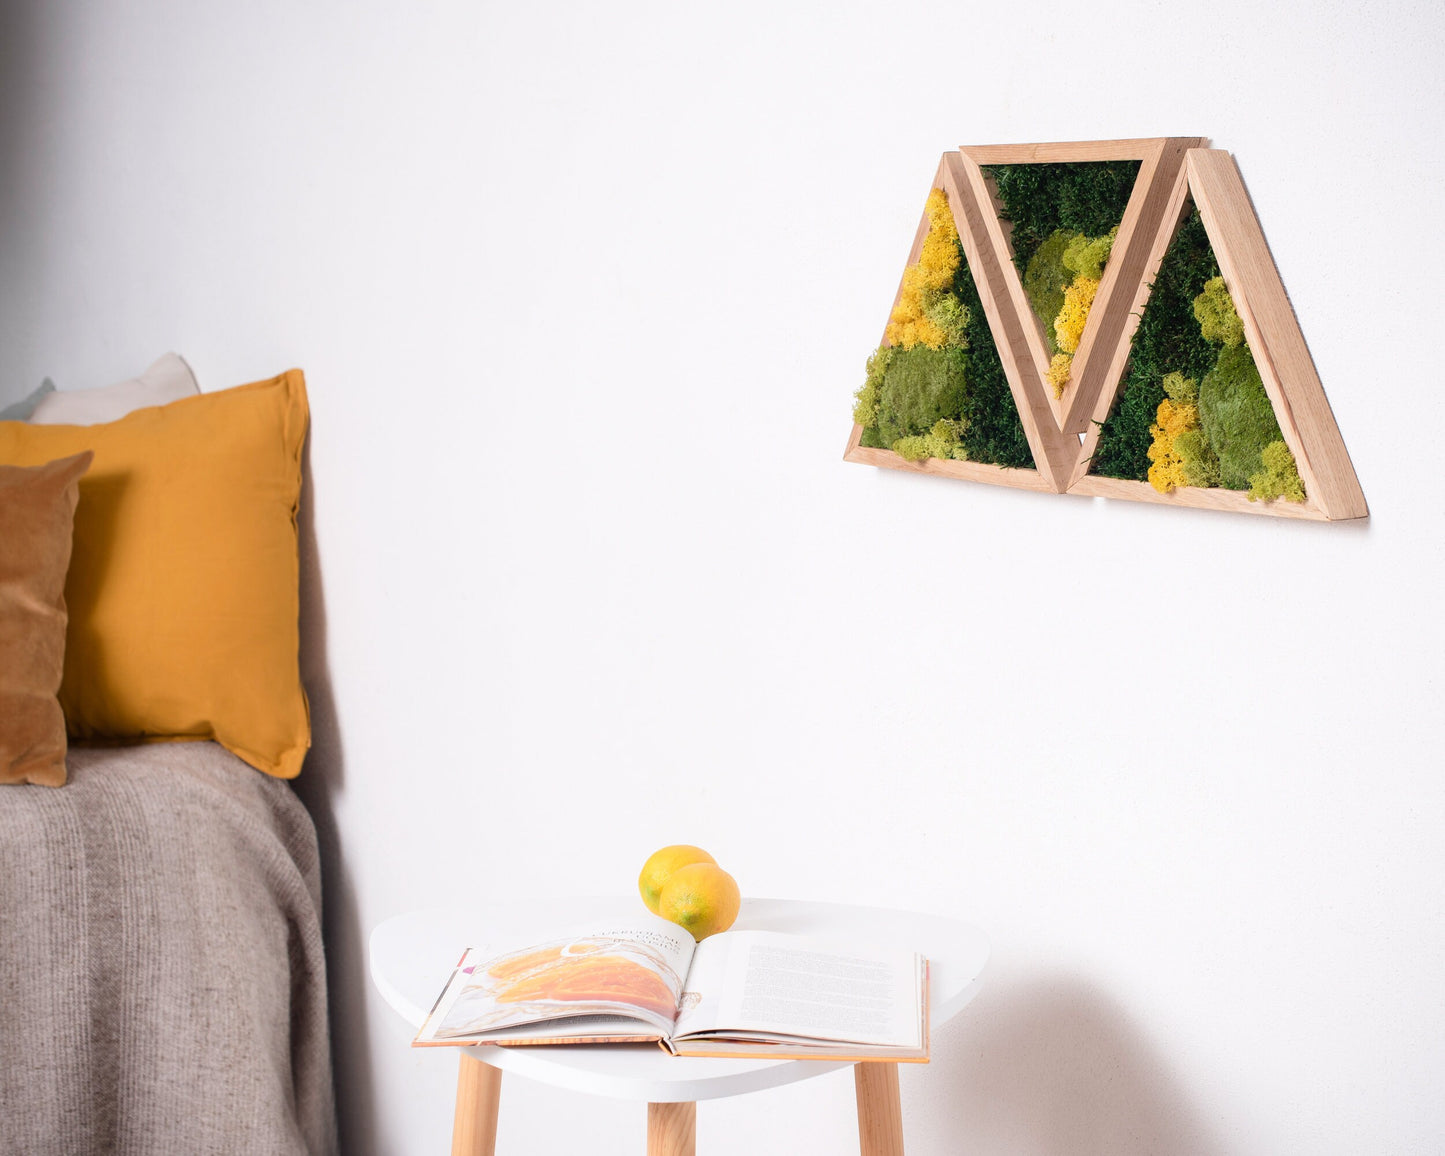 Minimalist Moss Living Wall Art: The Perfect Christmas Gift for Minimalist Decor Lovers